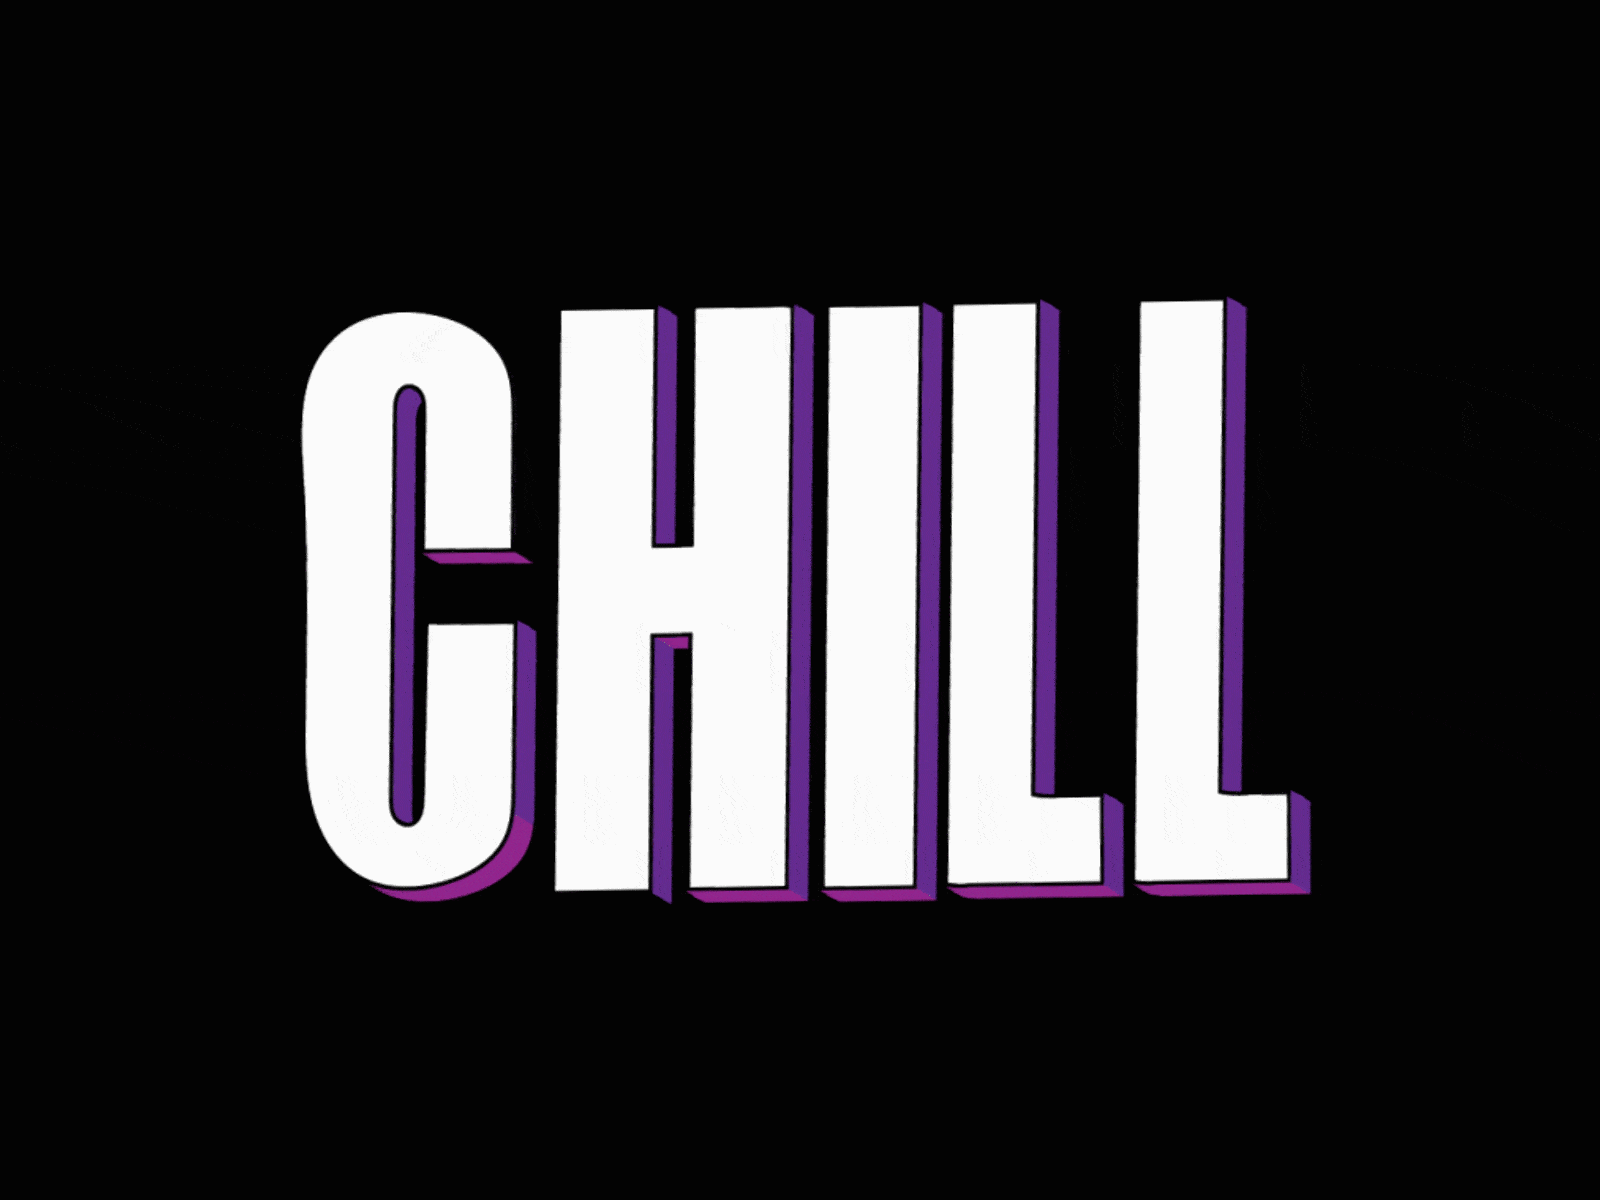 CHILL after effect animation chill design graphic design illustration inspiring kinetic kinetic animation kinetictype motion design motion designer motion graphics text animation type animation typography wave